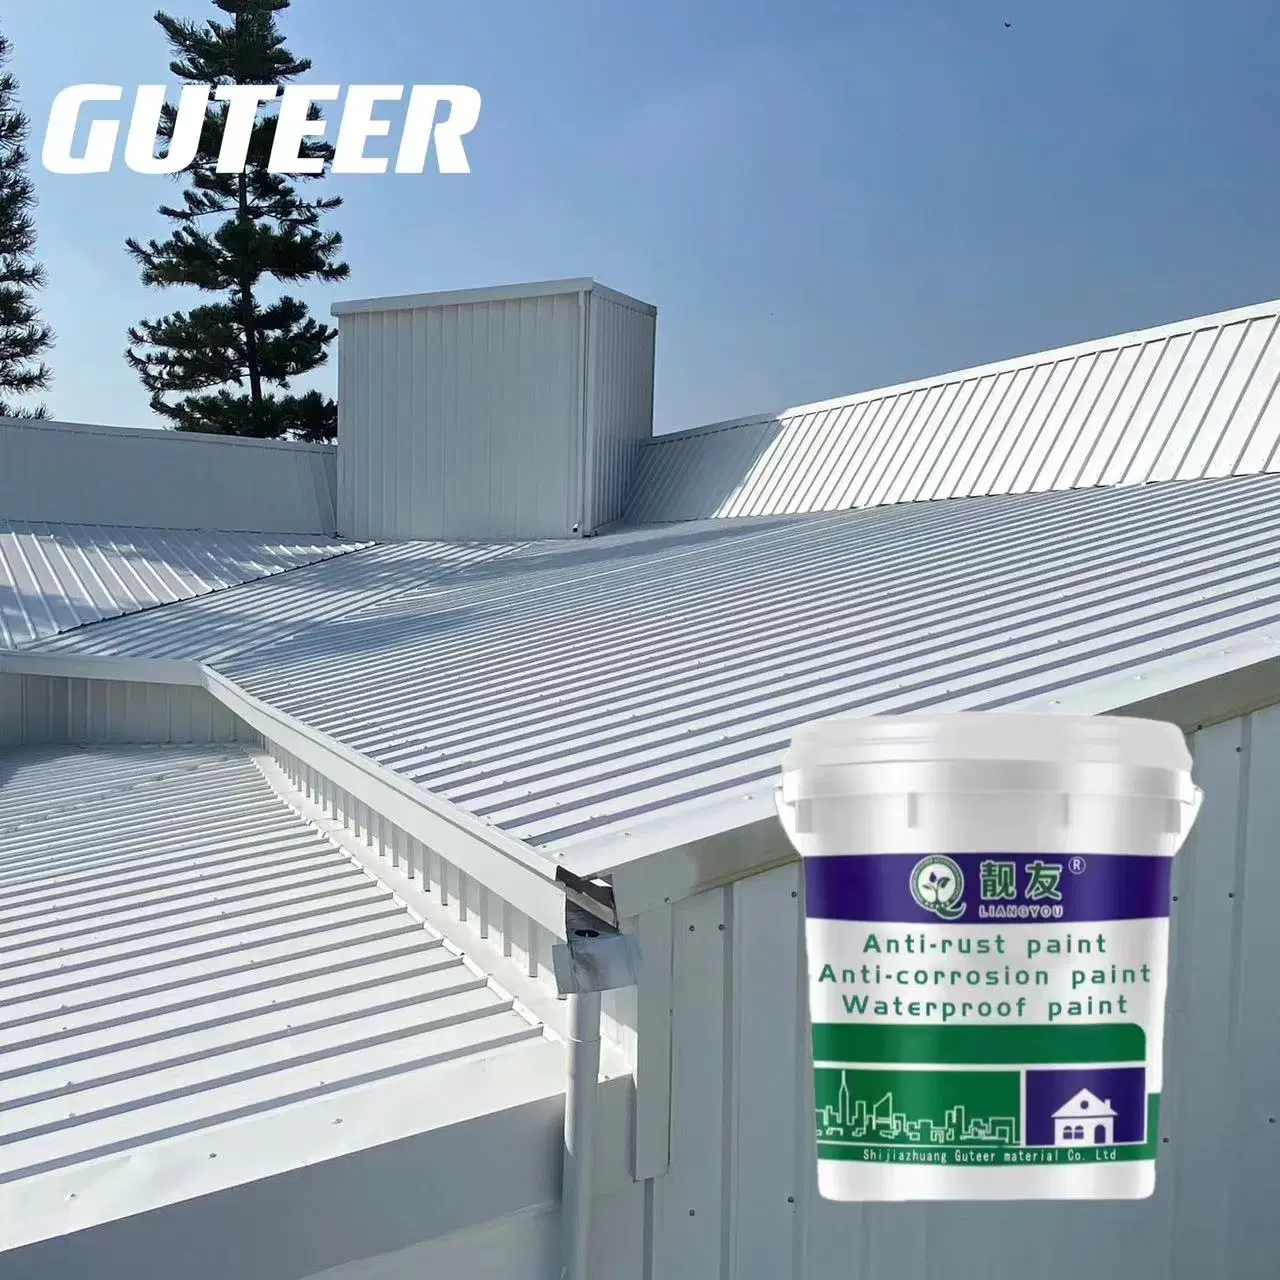 Aging-Resistant Water-Based Paint Antirust Paint for Metal Roofs